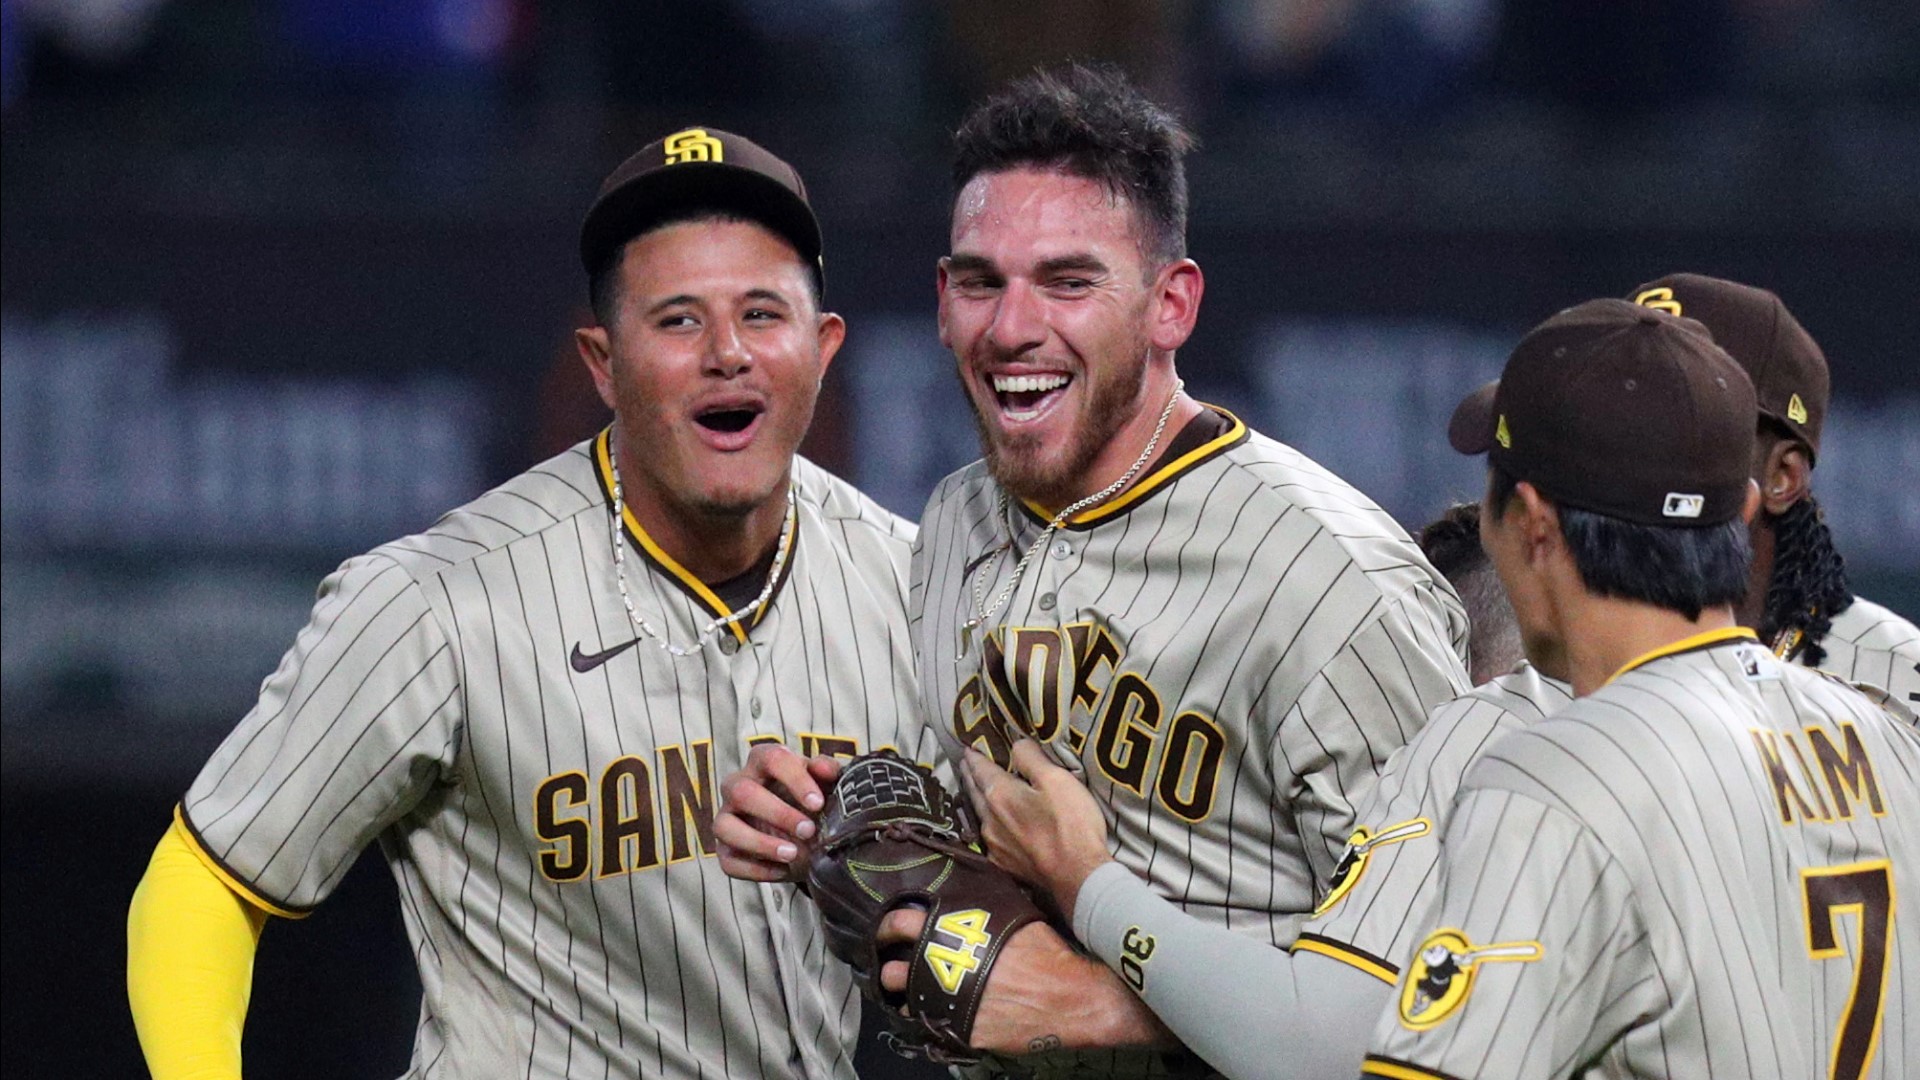 Padres play all 29 MLB teams in preliminary 2023 schedule